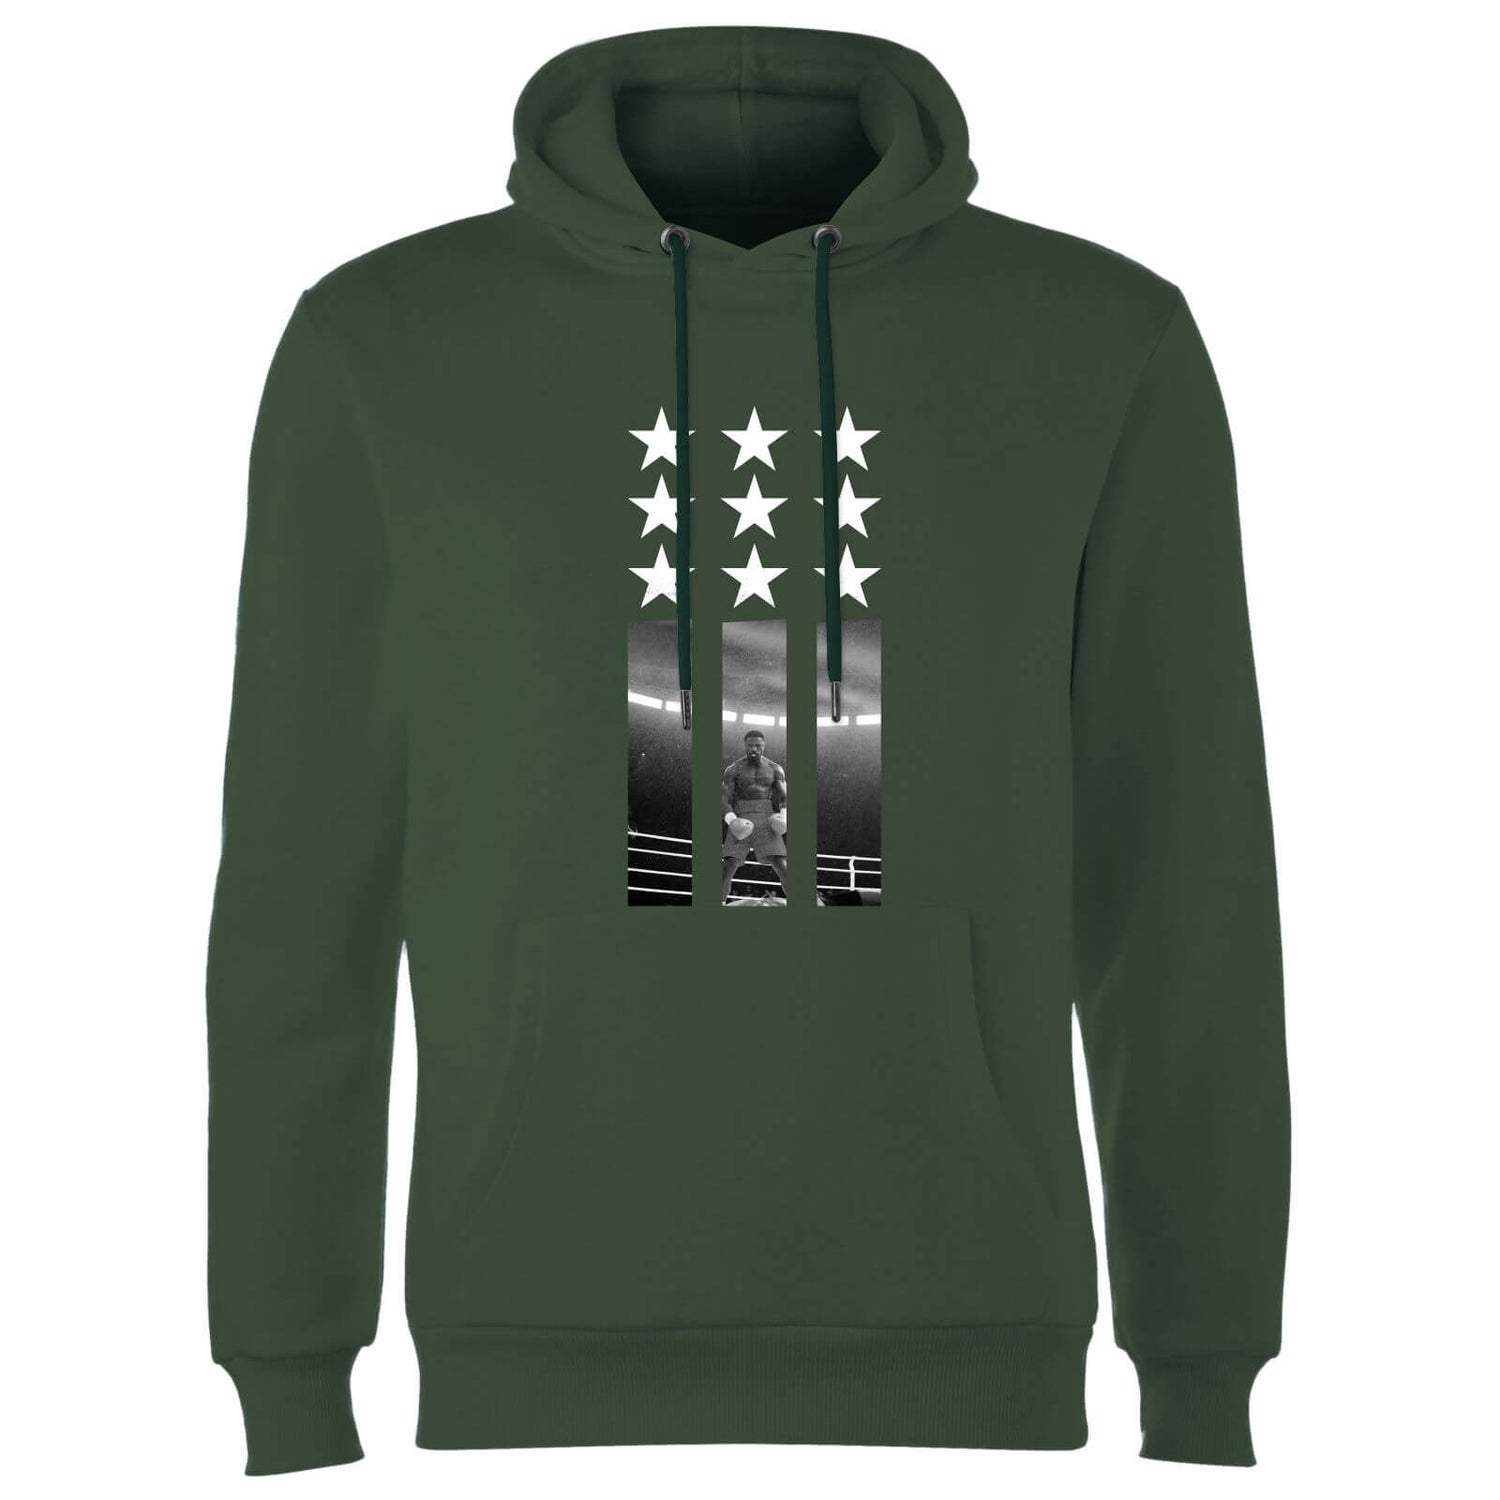 Creed Poster Stars Hoodie - Green